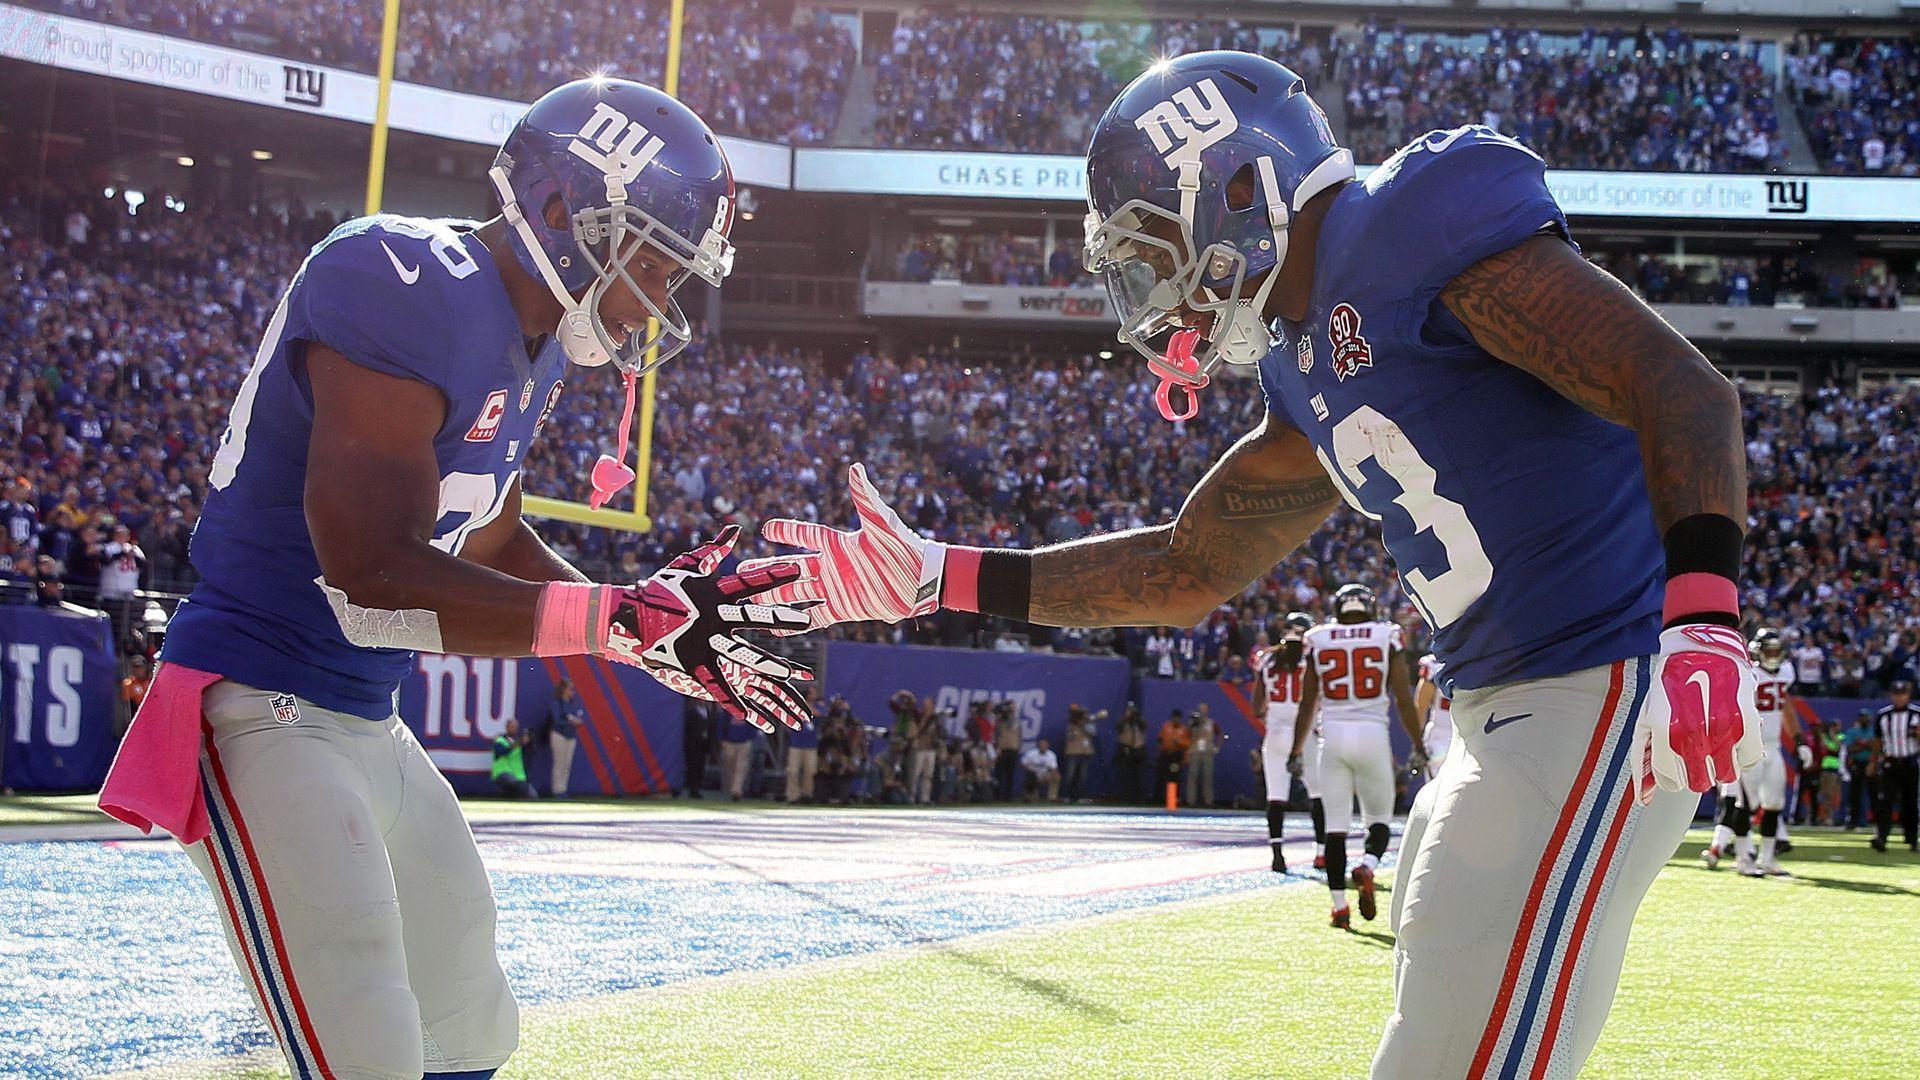 New York Giants receiver Odell Beckham Jr says fans would love